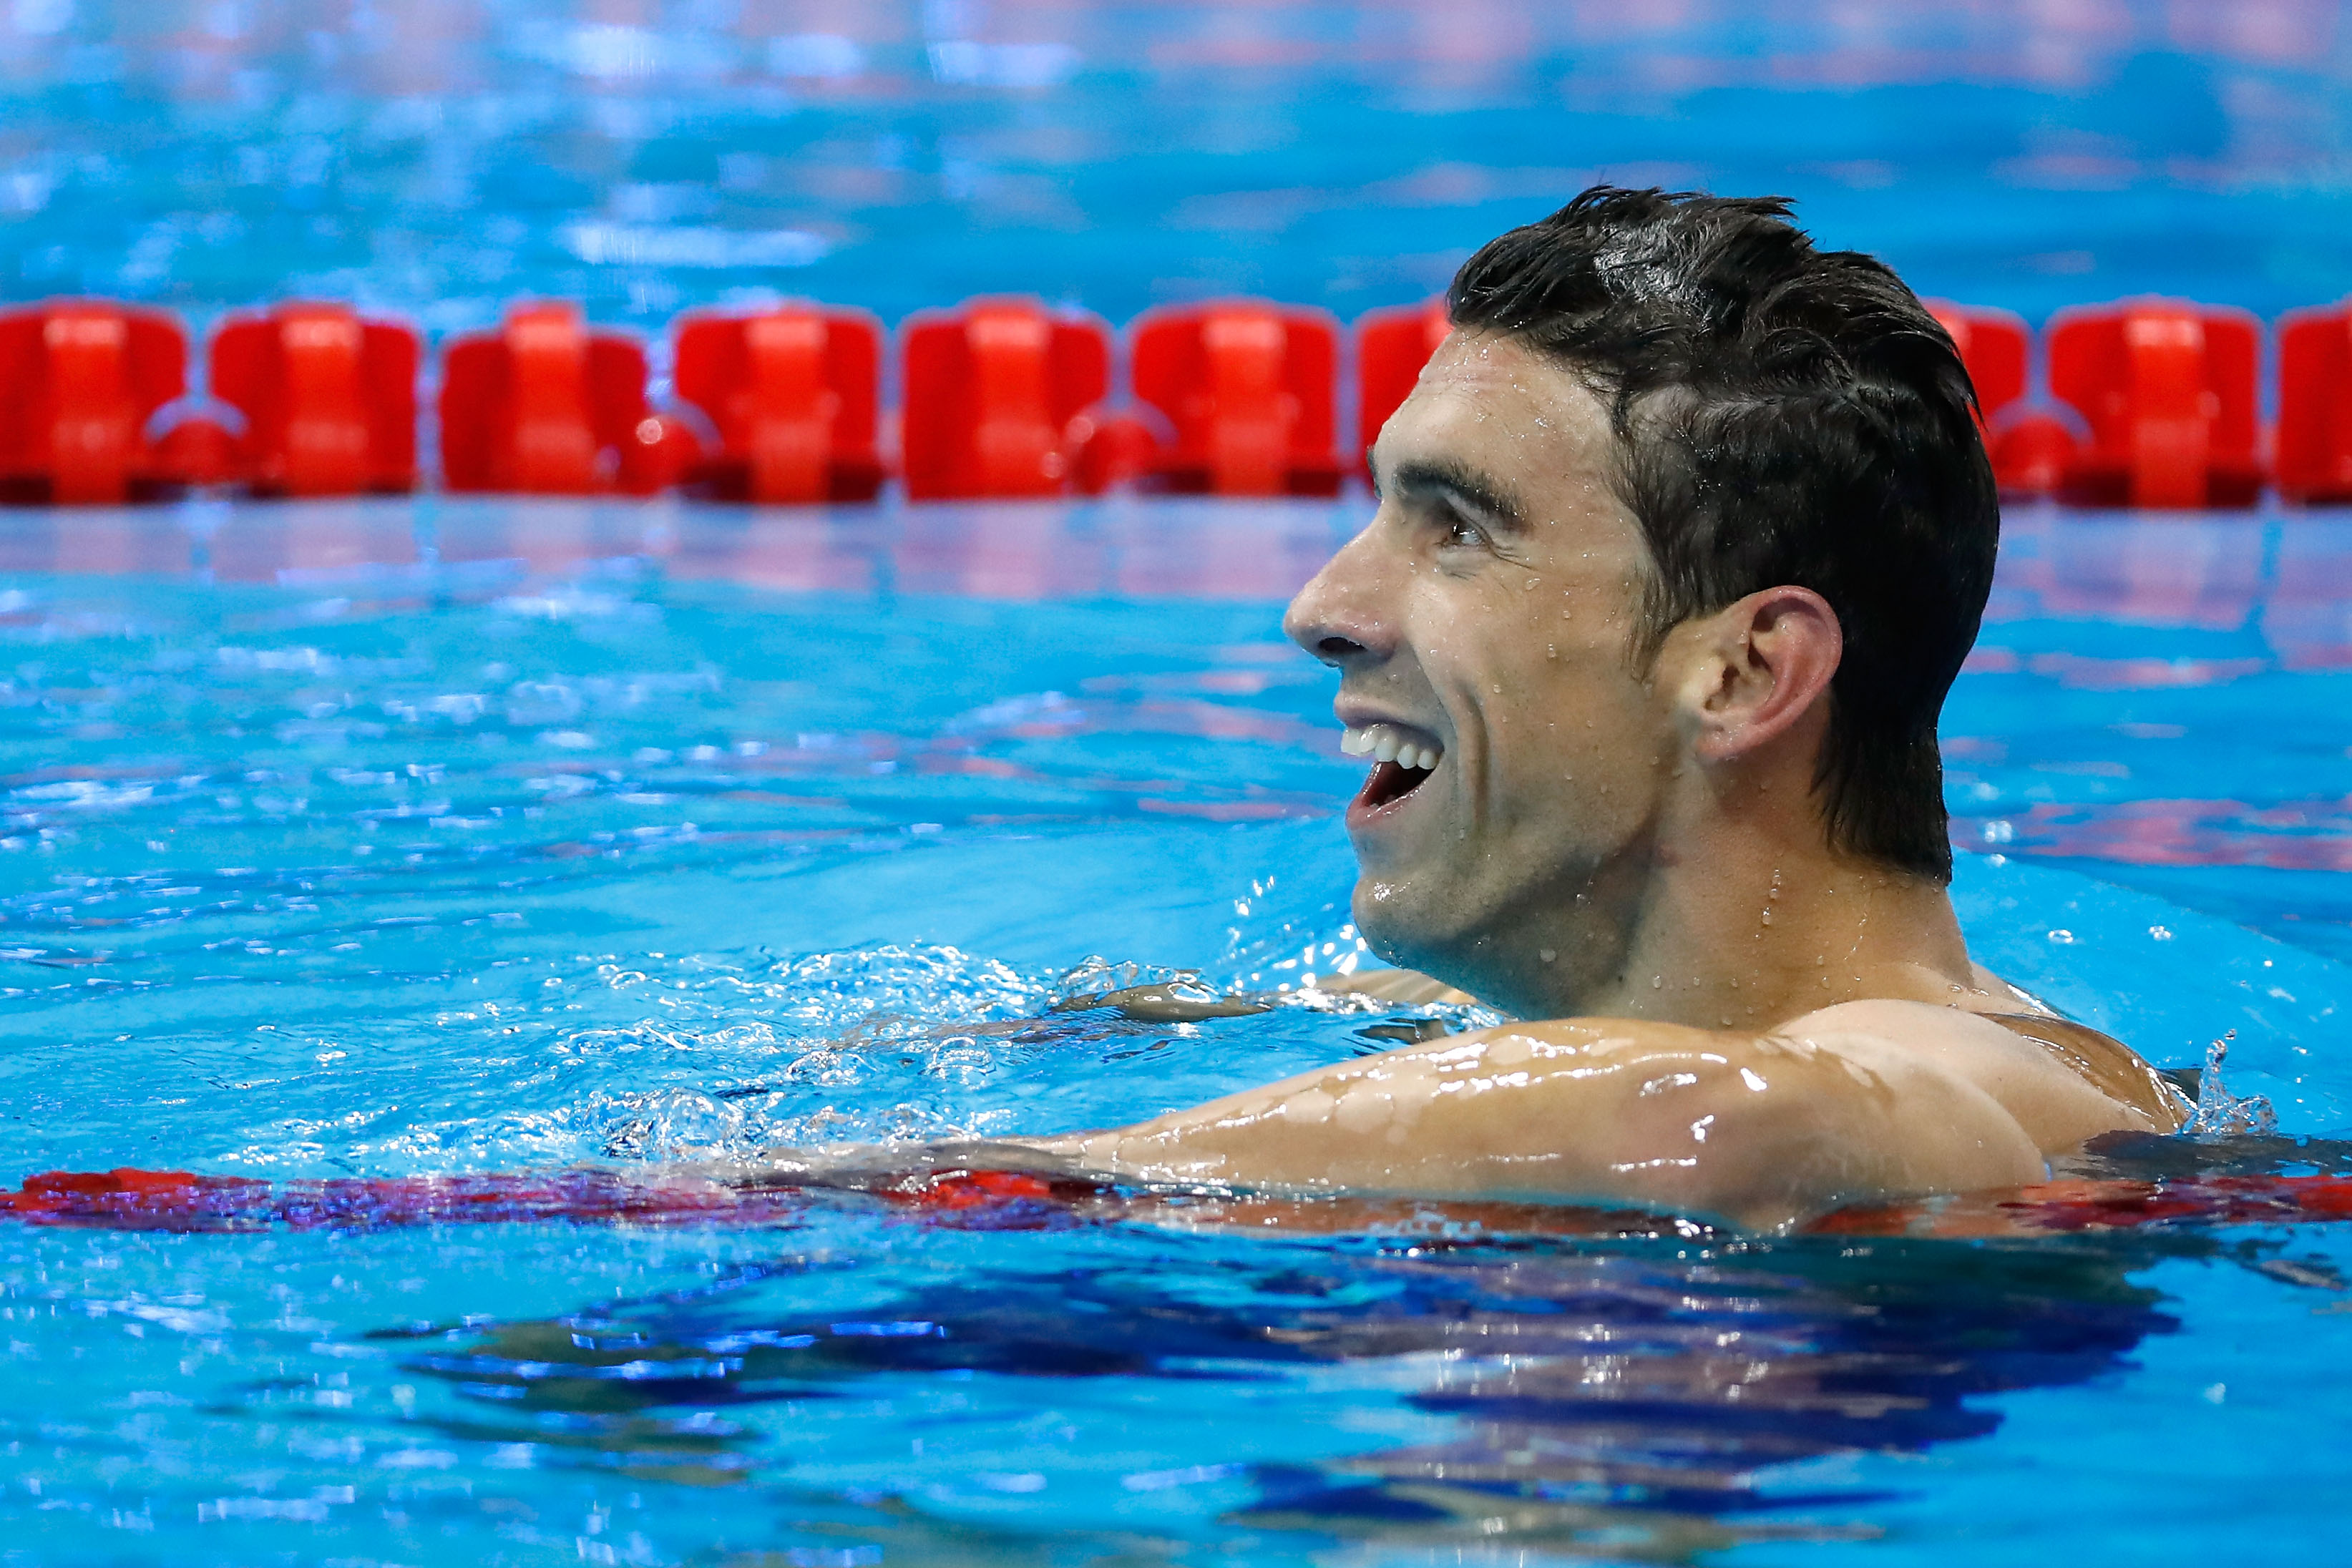 Michael Phelps' Age Doesn't Make Him An Underdog.